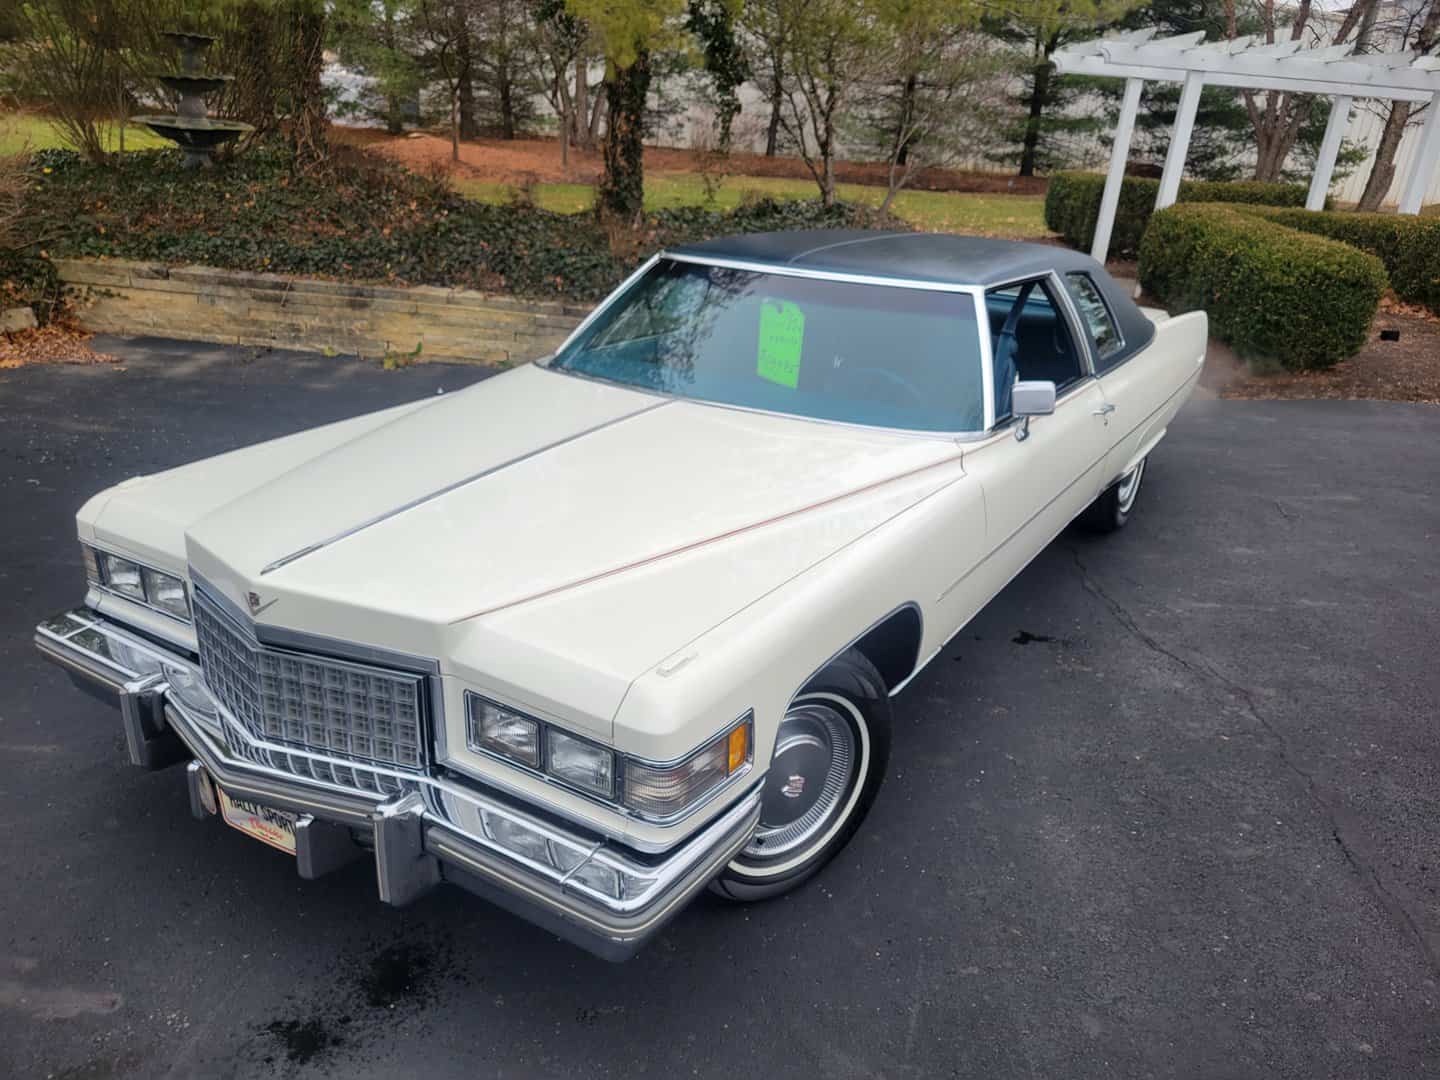 A Vintage 1976 Cadillac Coupe Deville Parked In A Driveway.